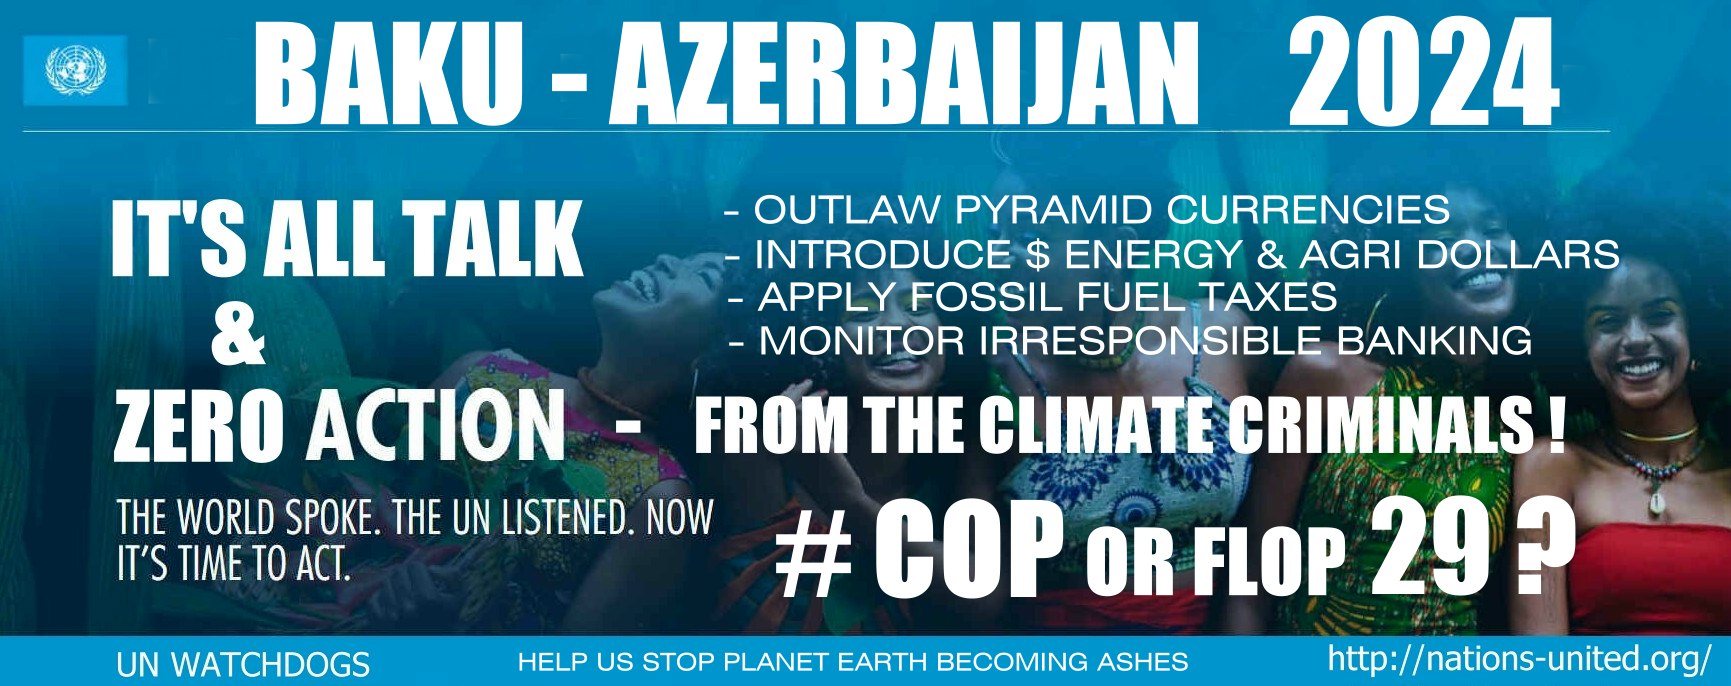 The agenda for COP29 in Baku, Azerbaijan, has not been set, but might include outlawing pyramid currencies, introducing an $Agri-Dollar, and abolishing subsidies for fossil fuels, whille also making provision for nations who rely on petroleum production, as oil is phased out in favour of renewable electricity and hydrogen